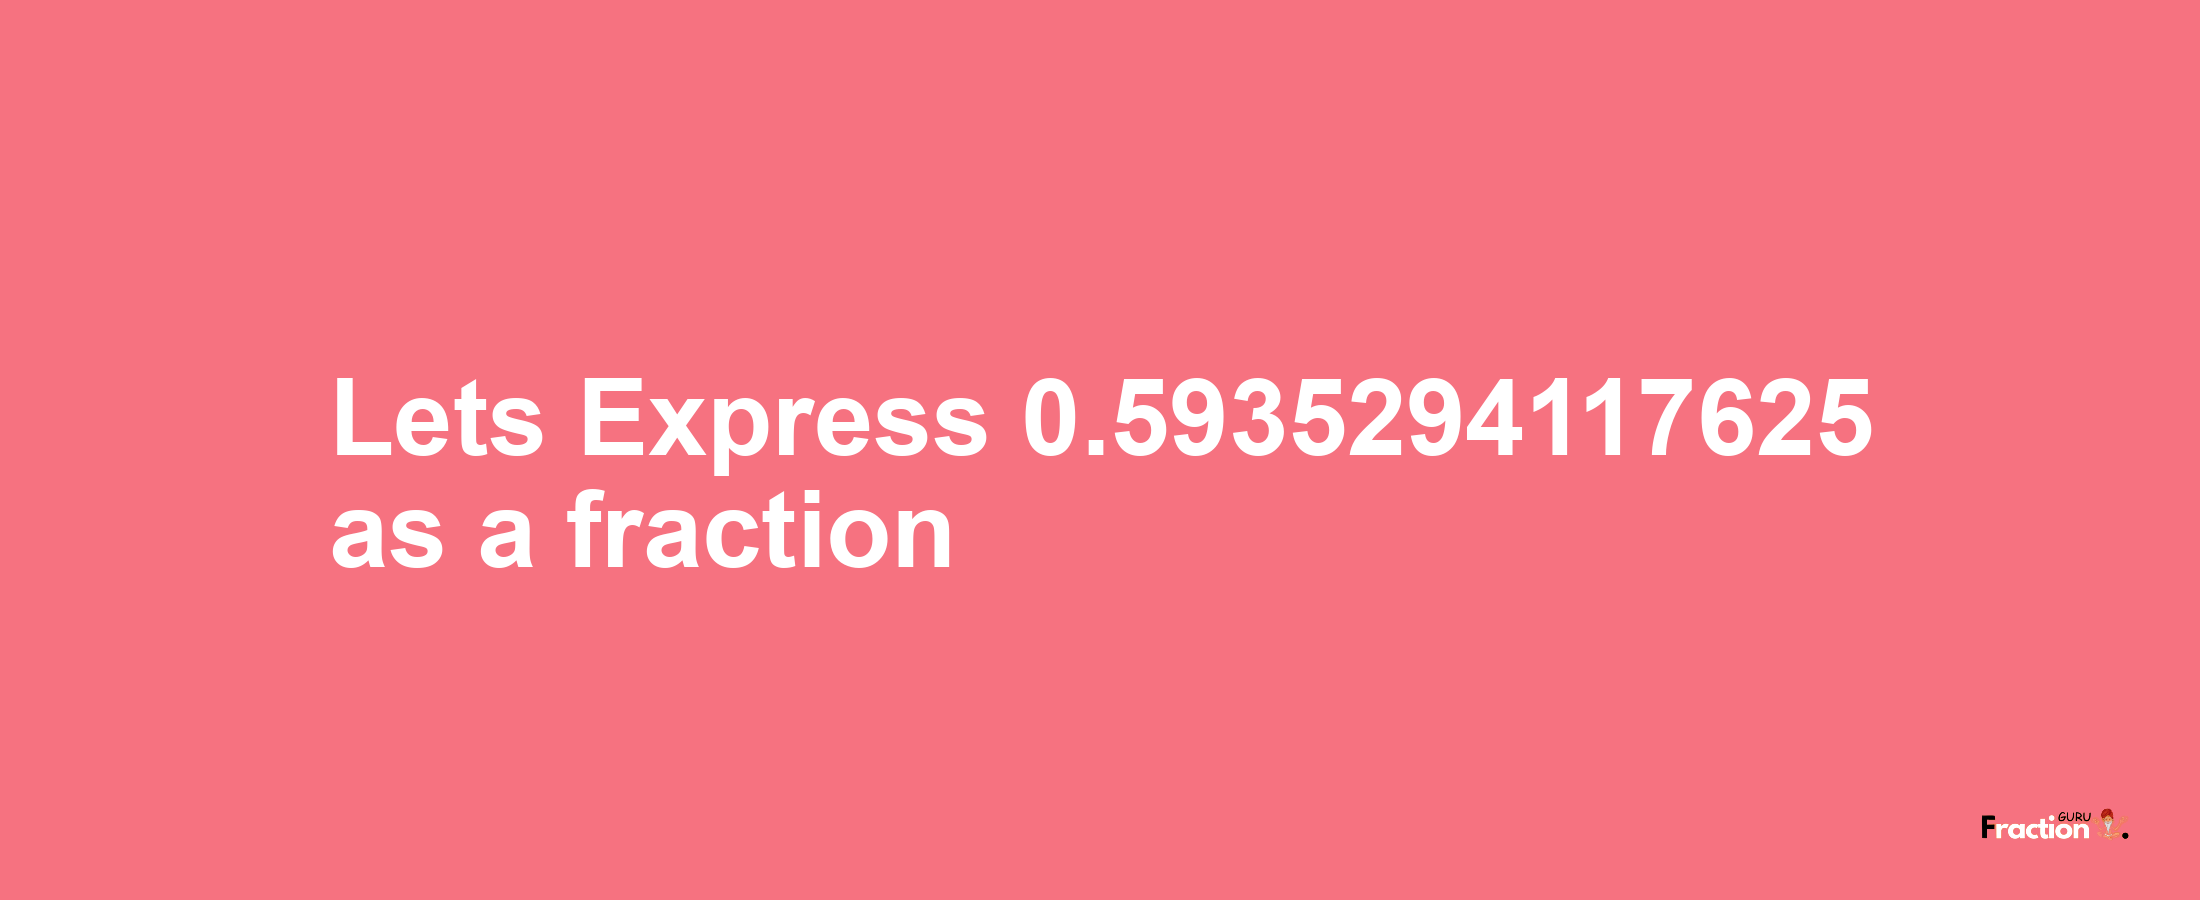 Lets Express 0.5935294117625 as afraction